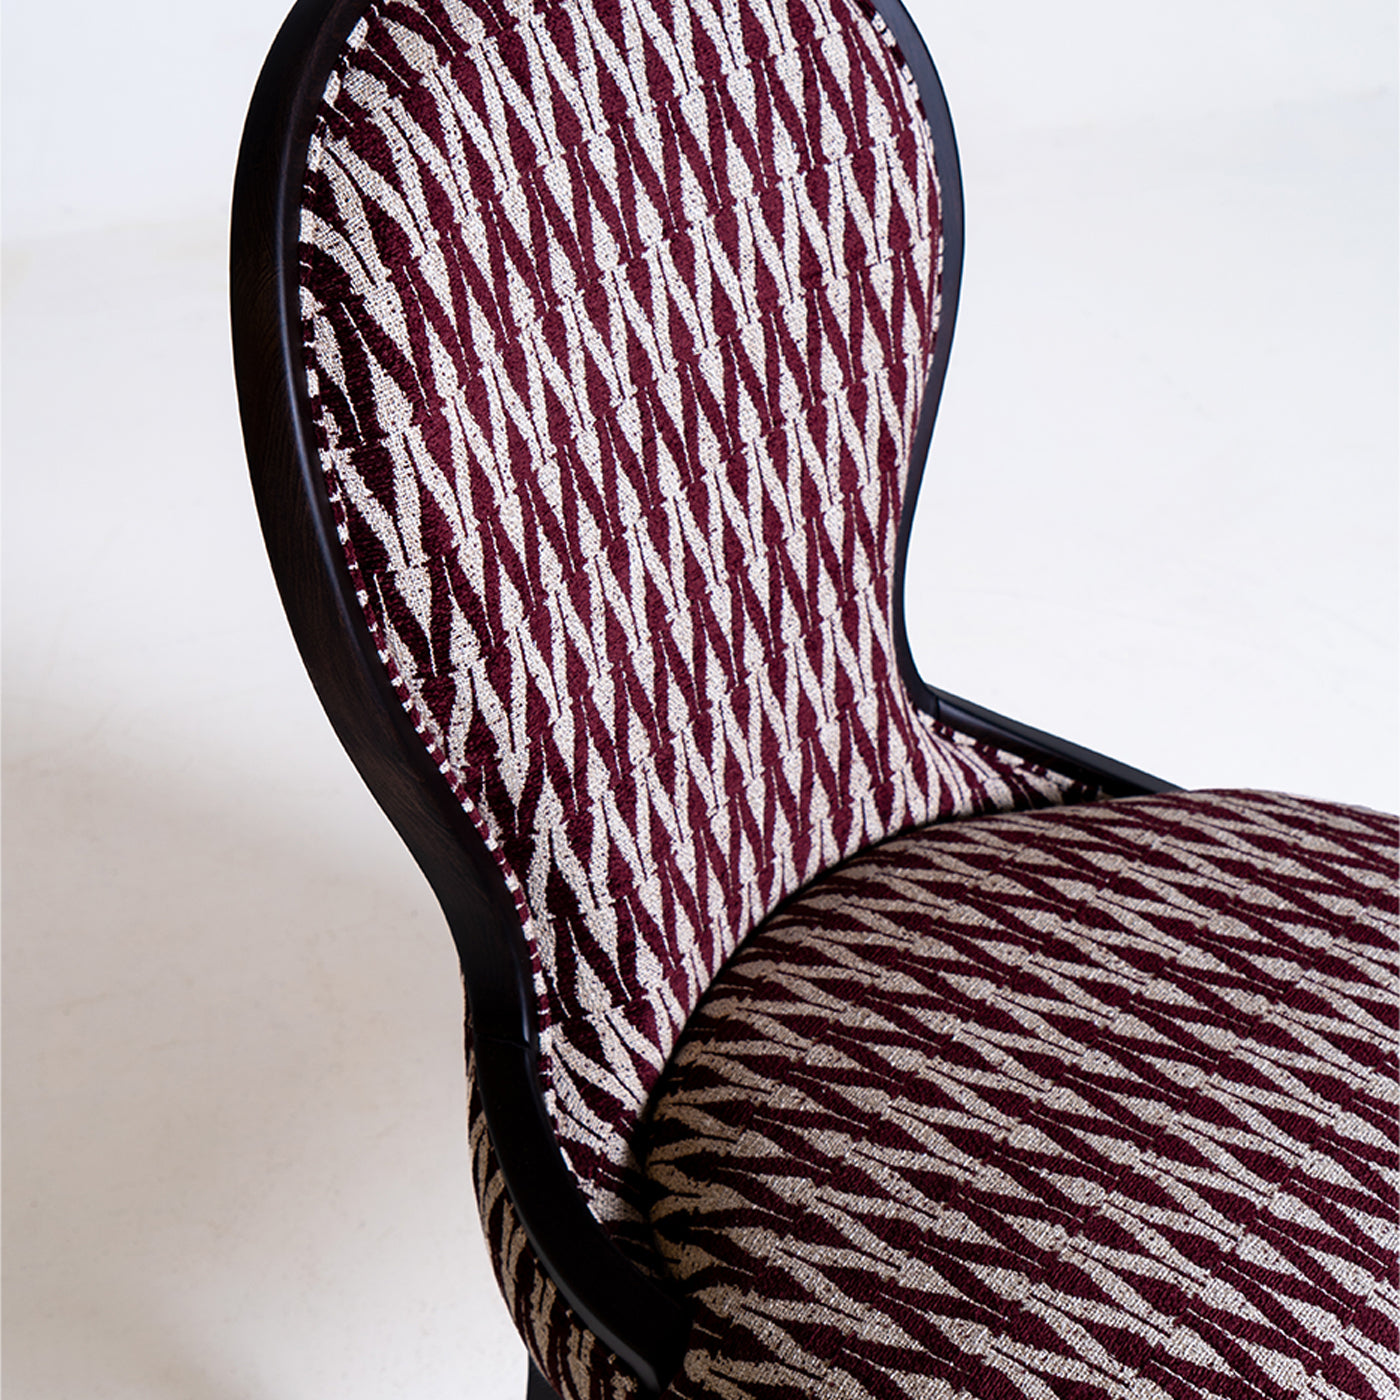 Gong Patterned Chair  - Alternative view 2